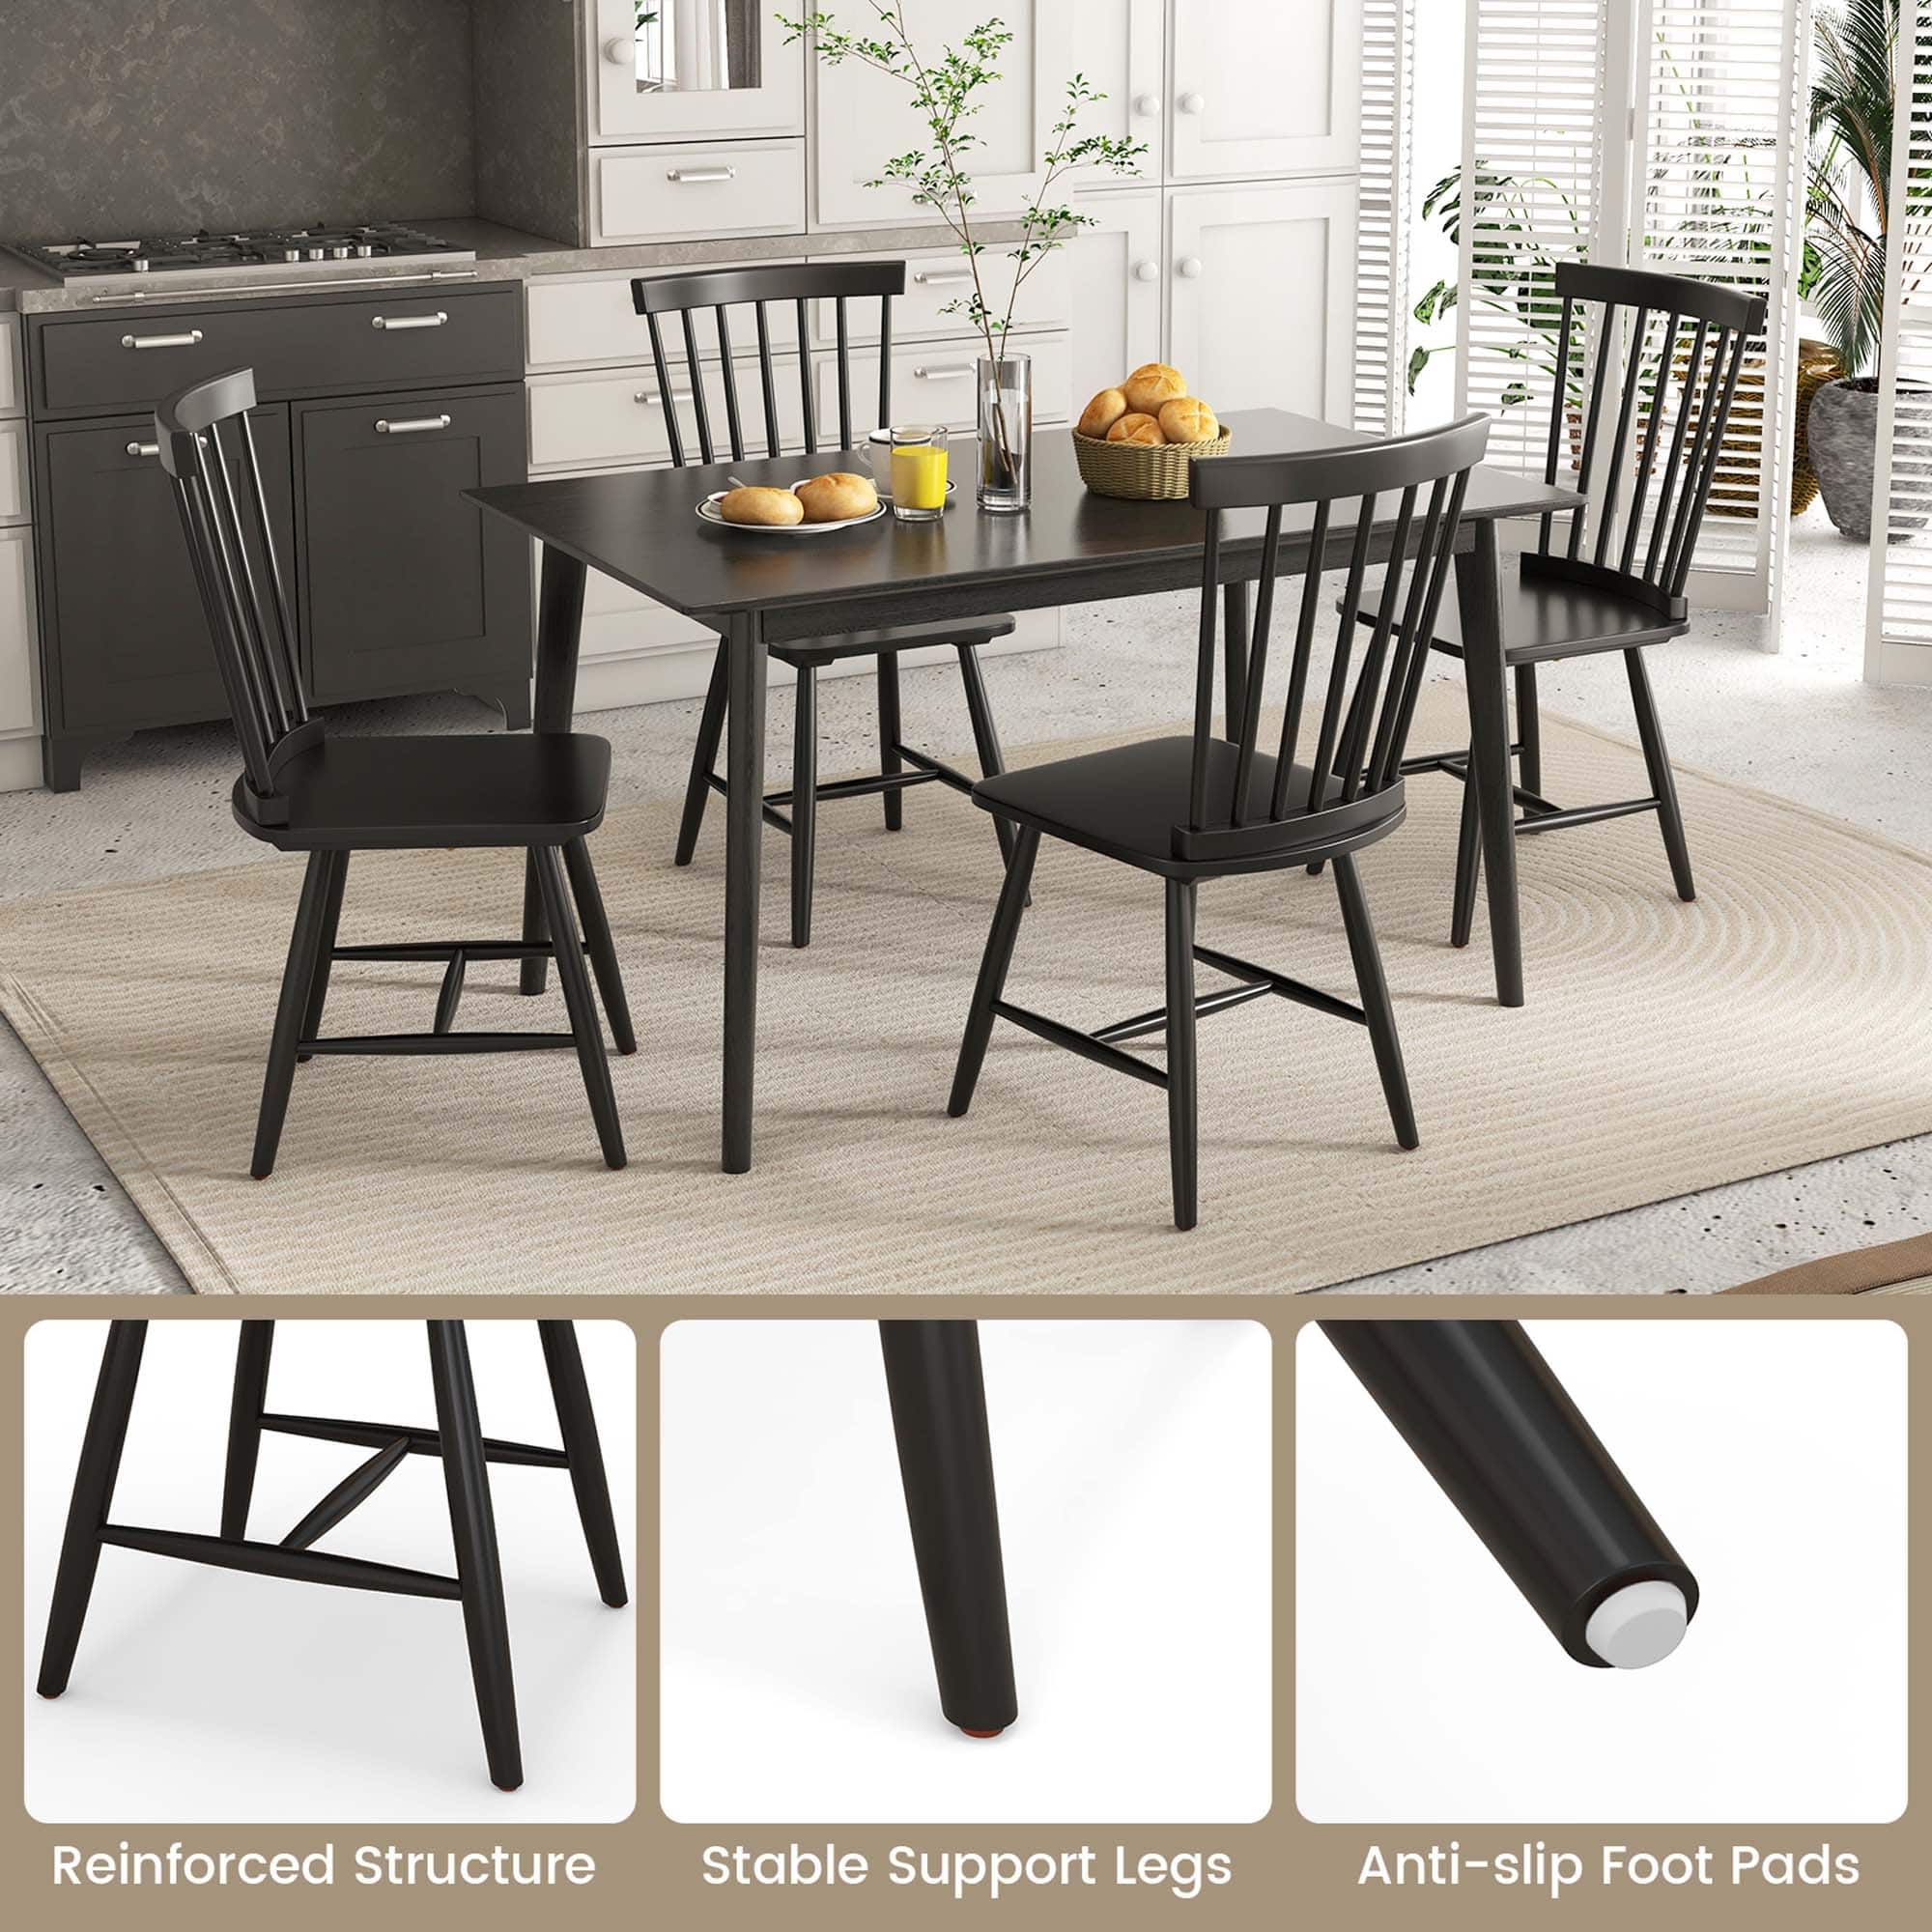 2 PCS Windsor Dining Chairs Armless Spindle Back Wood Black/Natural ...